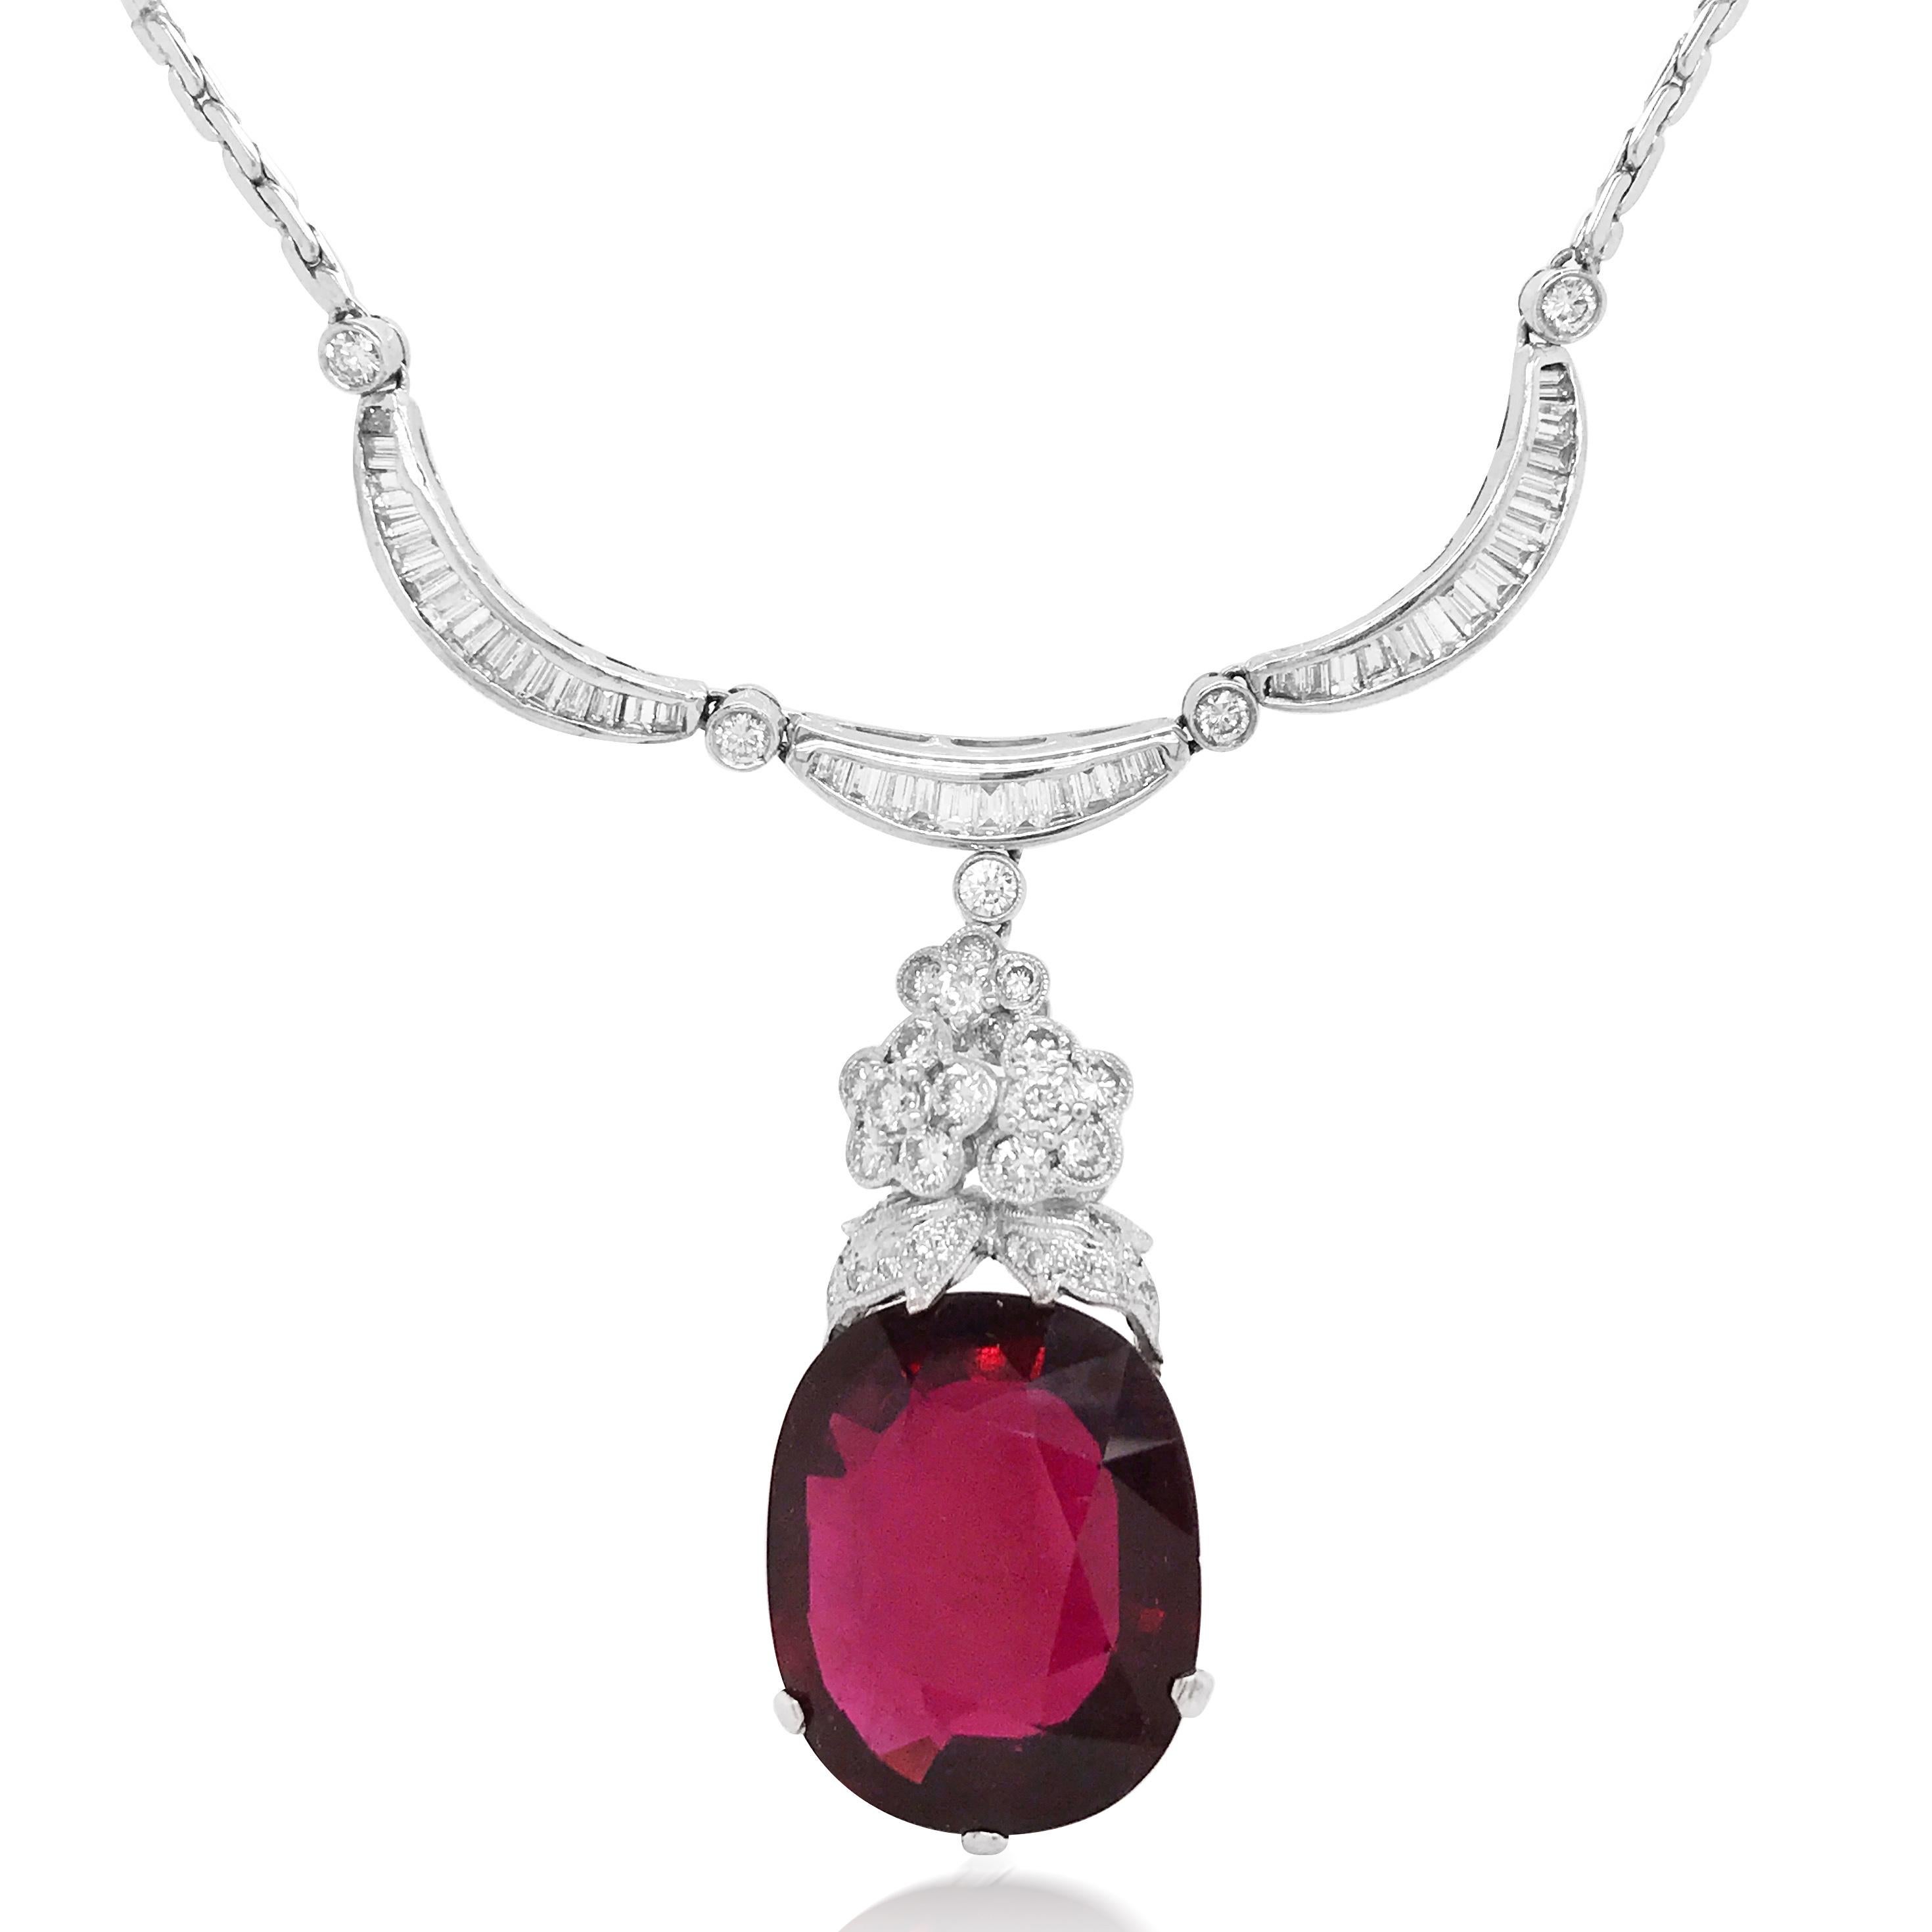 This breathtaking pendant features a beautiful garnet and round and baguette-cut diamond. The floral shape of diamonds is linked to the intense red garnet to form a stylish long drop design. In all, this garnet pendant necklace looks impeccably